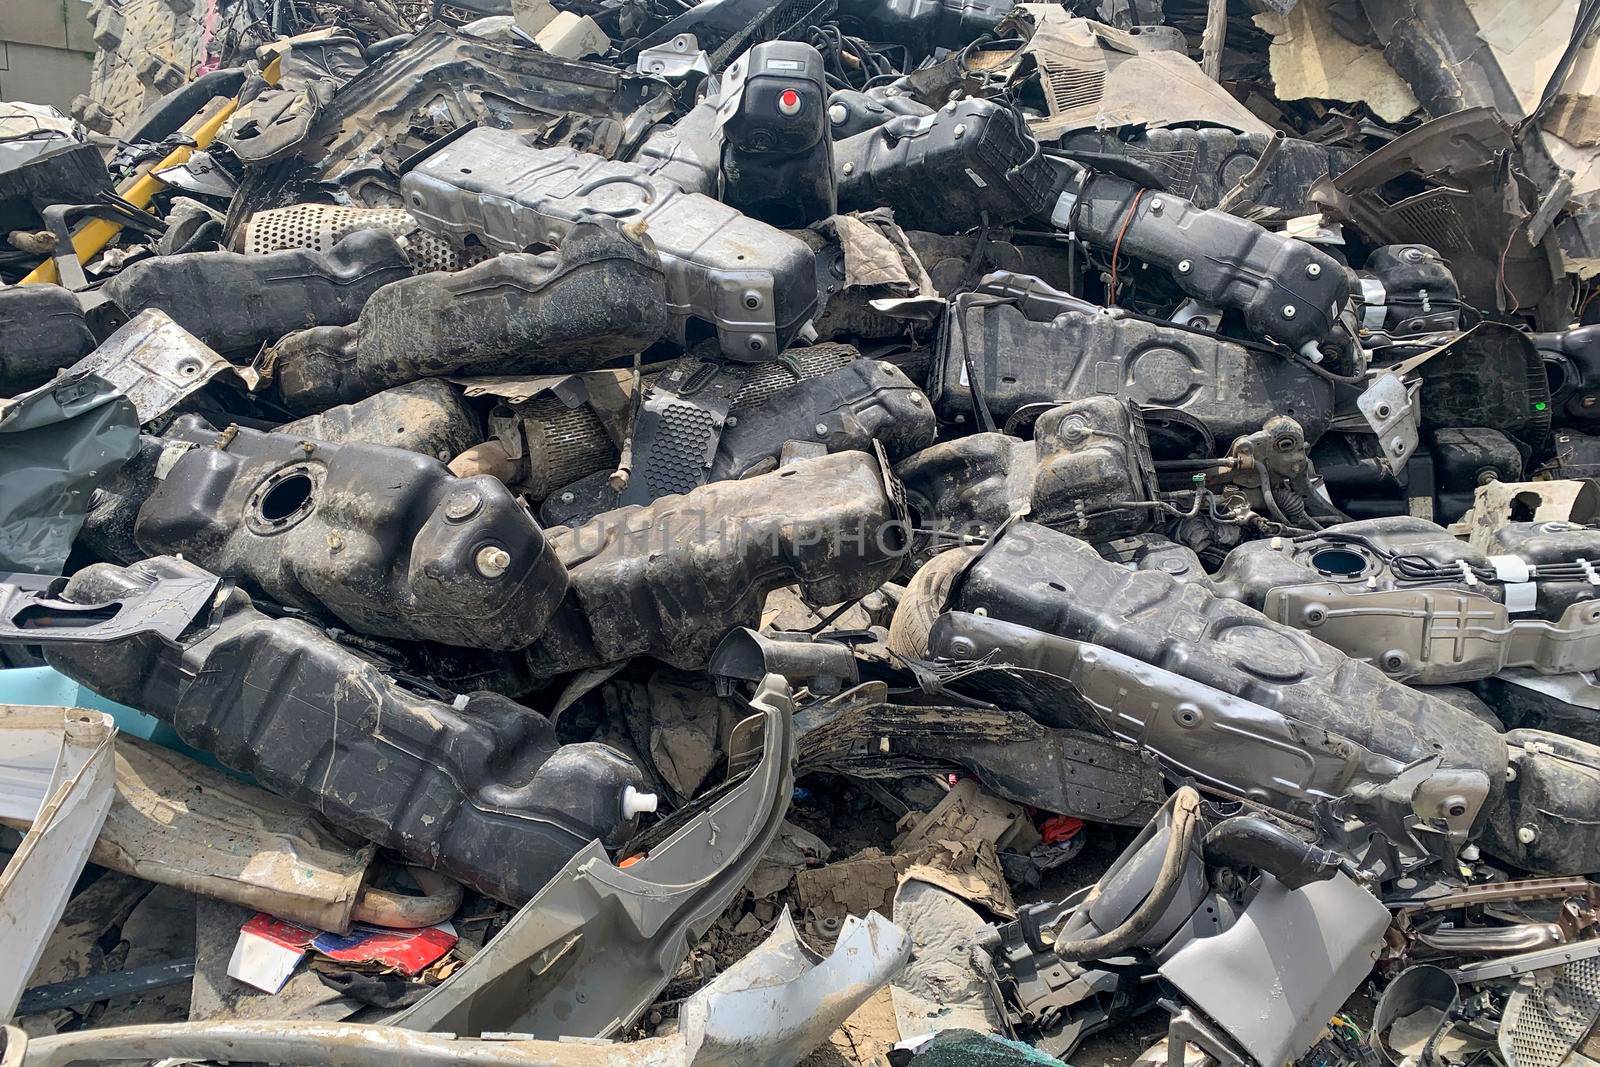 A lot of fuel tanks of broken automobiles, used auto spare parts for reuse, spare parts from damaged vehicles on junk yard or car dump. by Khosro1